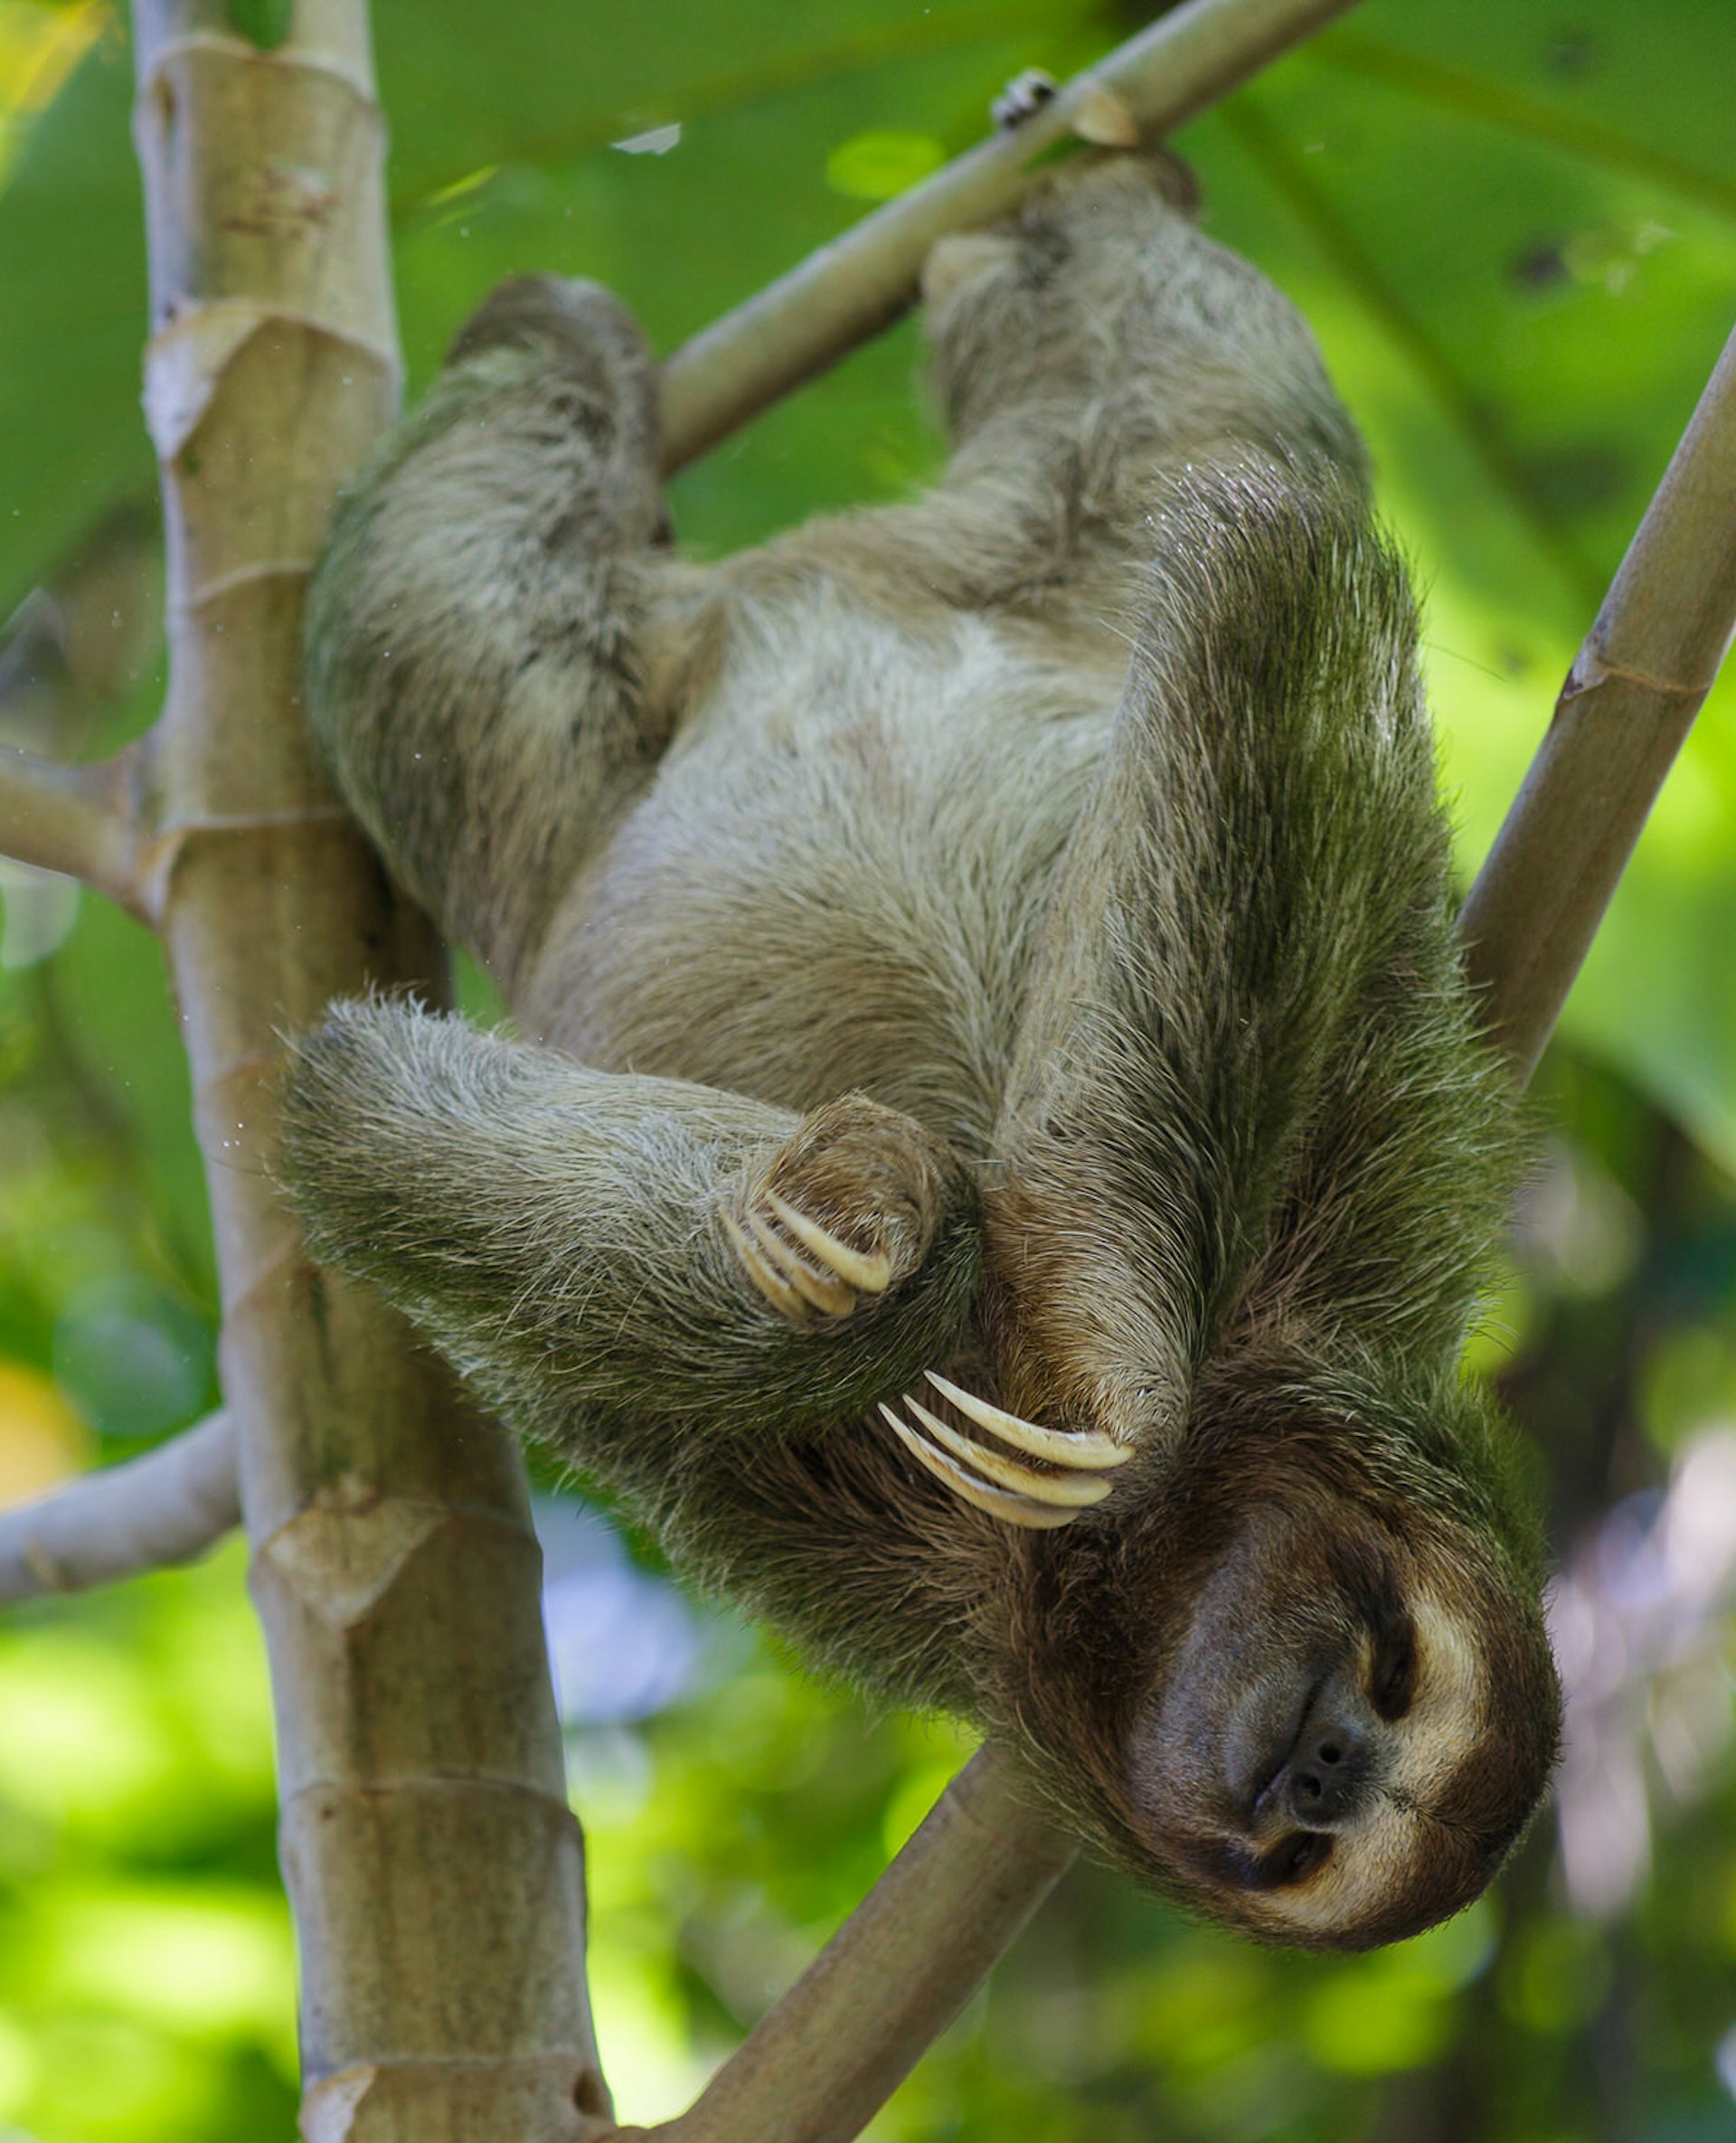 A three-toed sloth hanging around in Manuel Antonio National Park, Costa Rica © CharlieMIllerKB / Getty Images